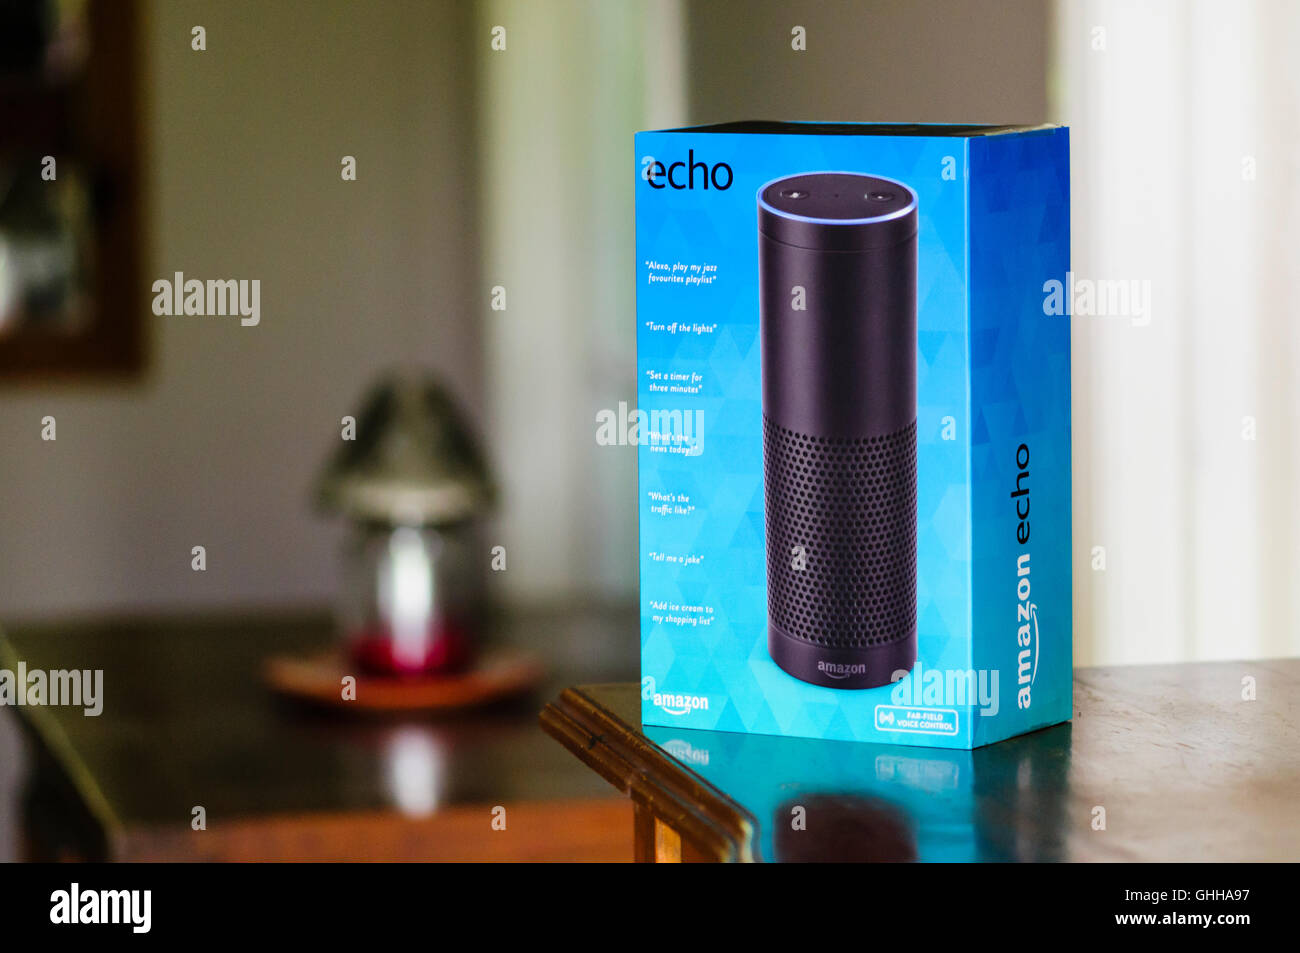 UK. 28th September, 2016. Amazon begins selling its Echo voice recognition device in the UK Credit:  Stephen Barnes/Alamy Live News Stock Photo